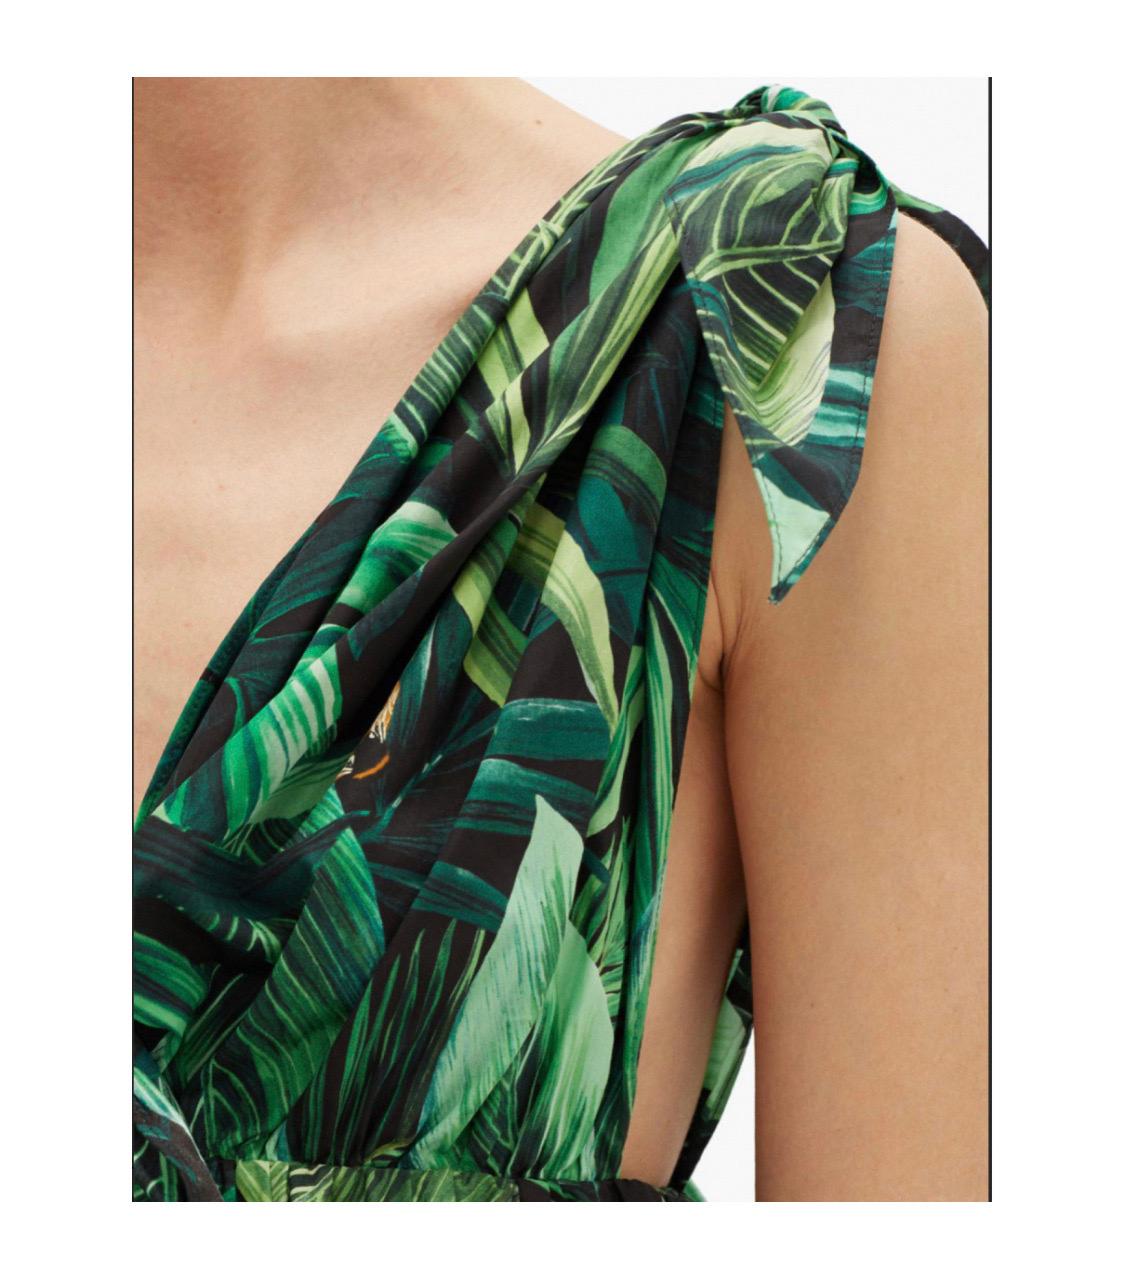 Iconic Dolce & Gabbana’s green
dress evokes the ‘Sicilian Jungle’ mood
of the SS20 runway, where it was first
seen. A balmy leaf-print envelops the
cotton-poplin silhouette which is
shaped with a V-neck and fastens with
gathered ties then falls to a